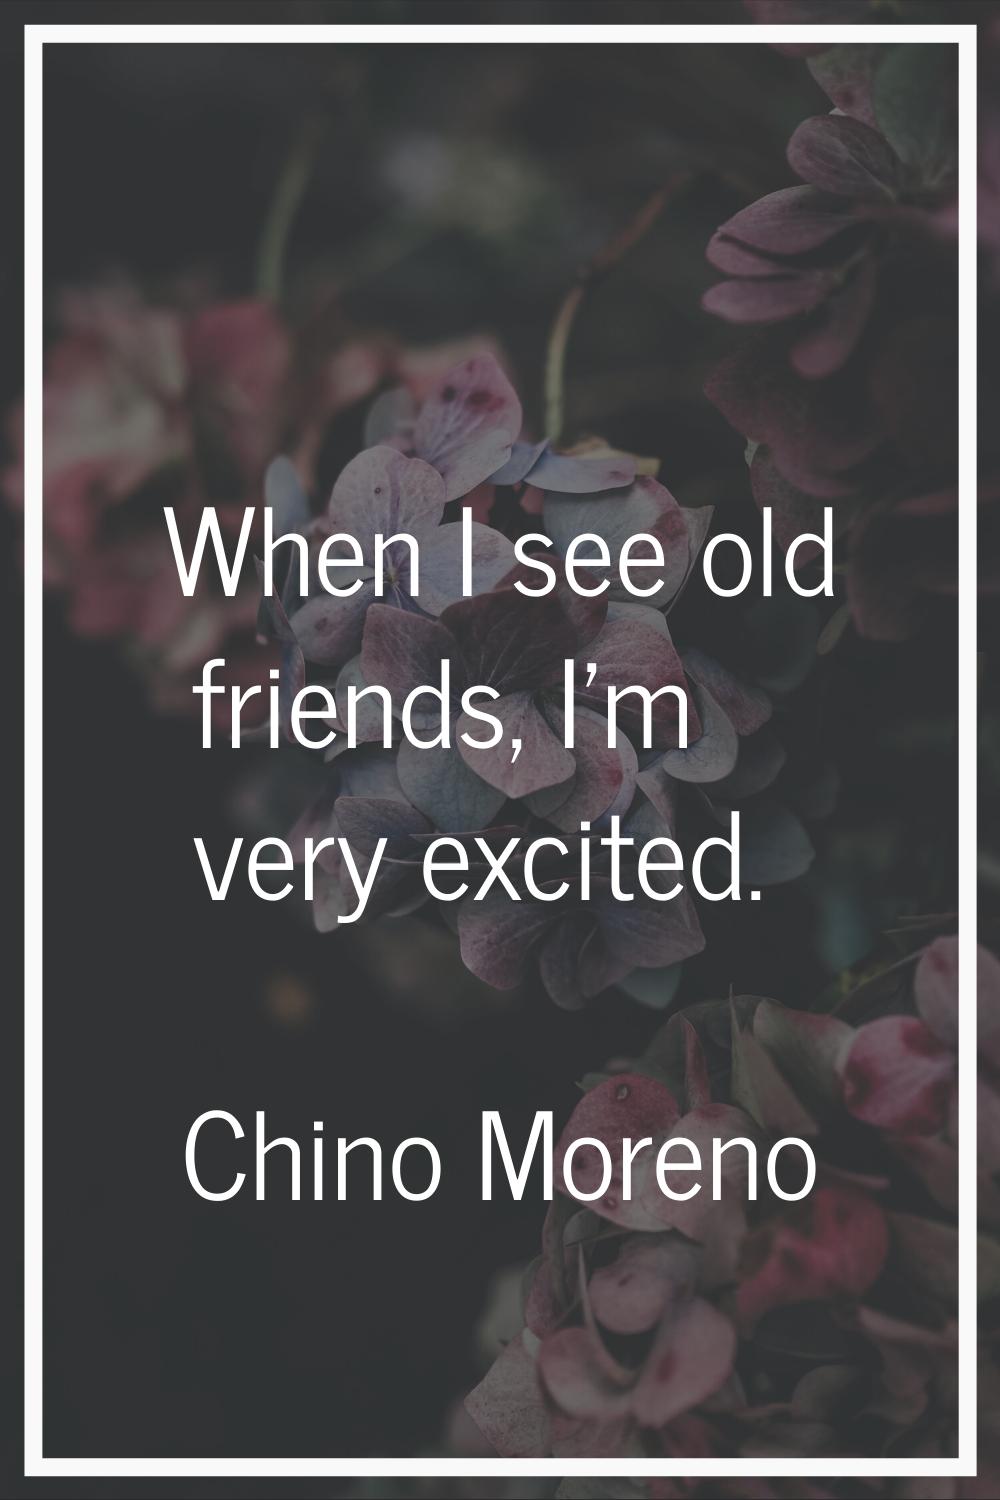 When I see old friends, I'm very excited.